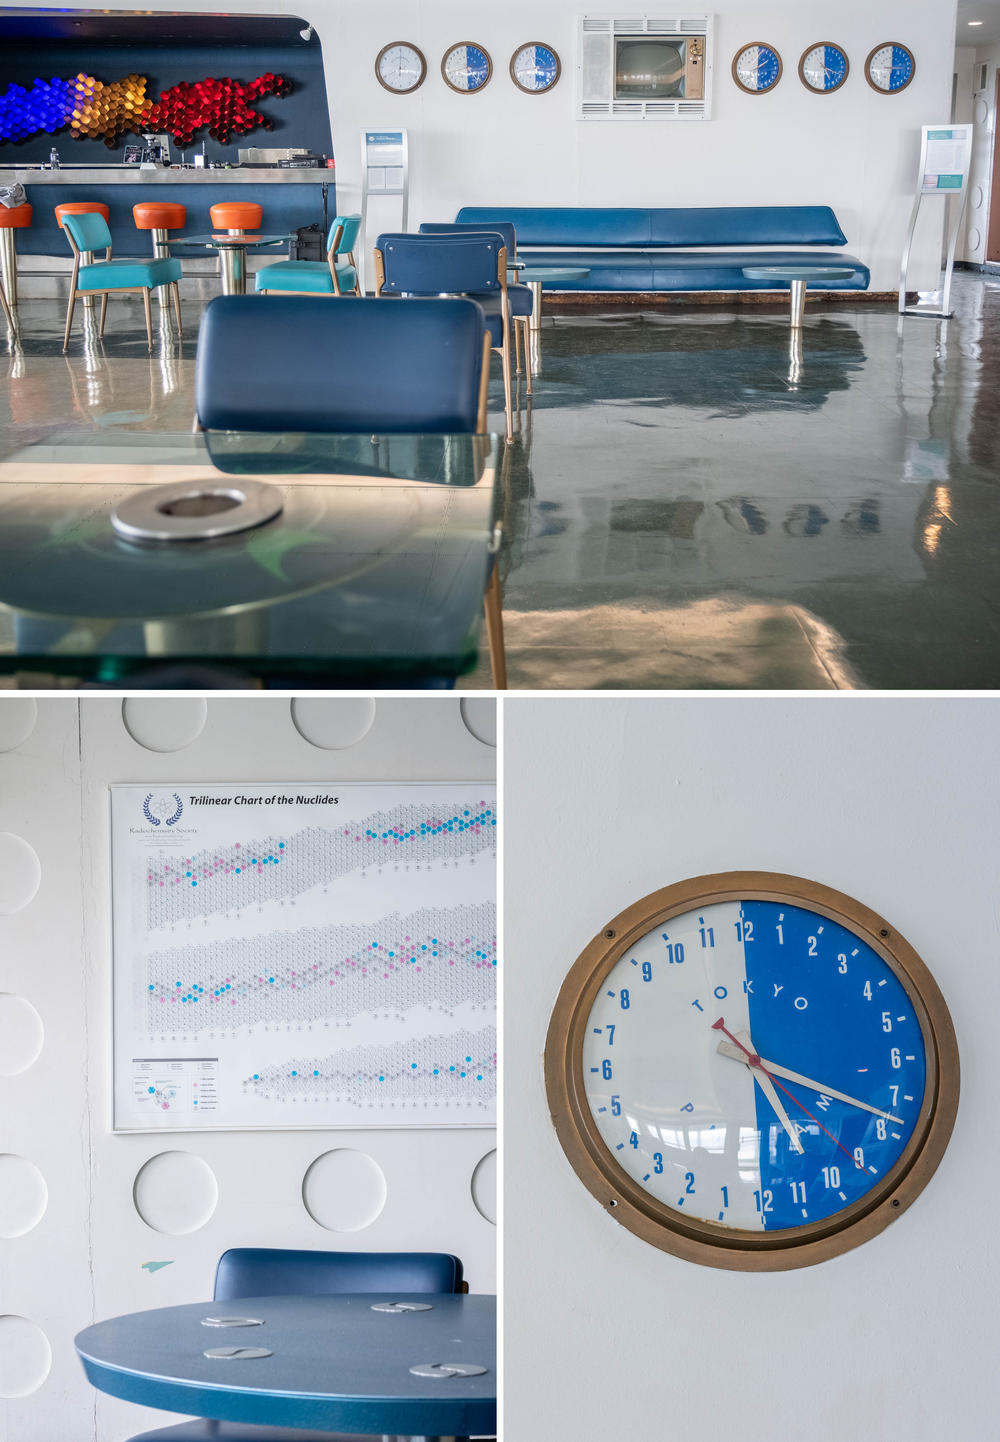 The ship's lounge overlooked a small swimming pool and sported a bar (top). The bar's wine rack was inspired by the chart of the nuclides (bottom left). Clocks gave the time in locations around the world, a nod to the Savannah's international mission (bottom right).